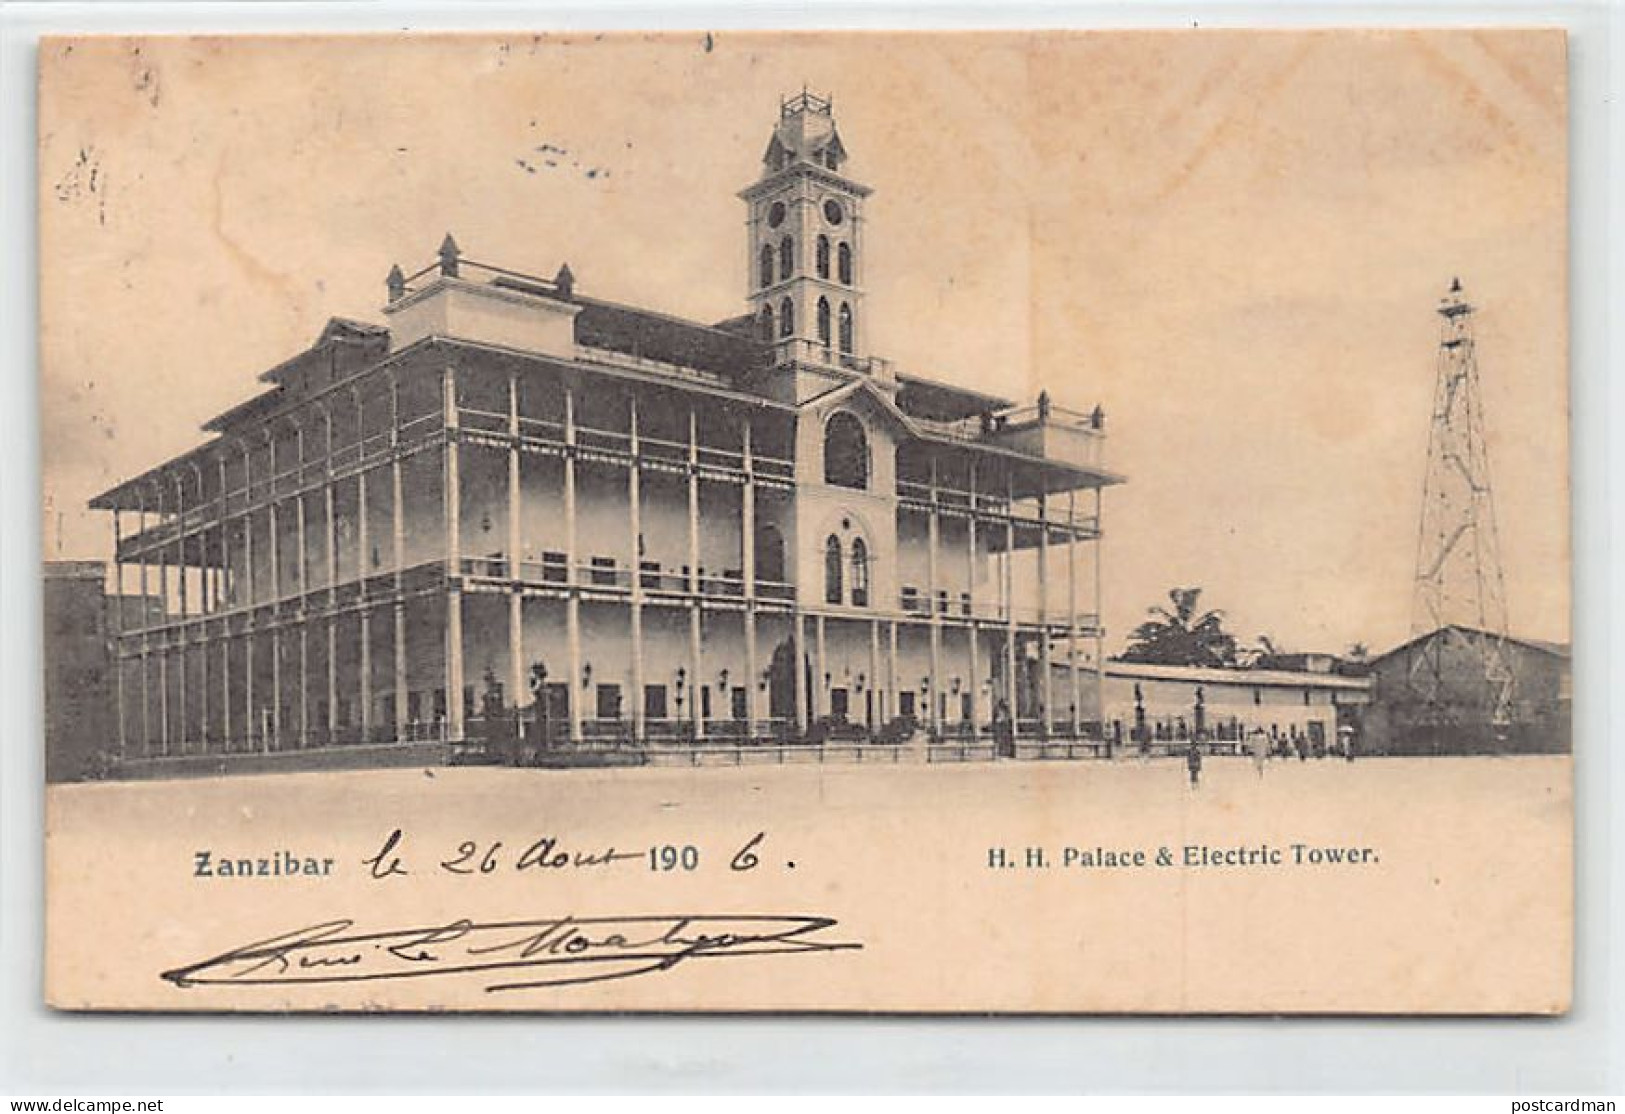 Tanzania - ZANZIBAR - H.H. Palace And Electric Tower - POSTCARD IS UNSTICKED - Publ. Pereira De Lord Brothers  - Tanzanie